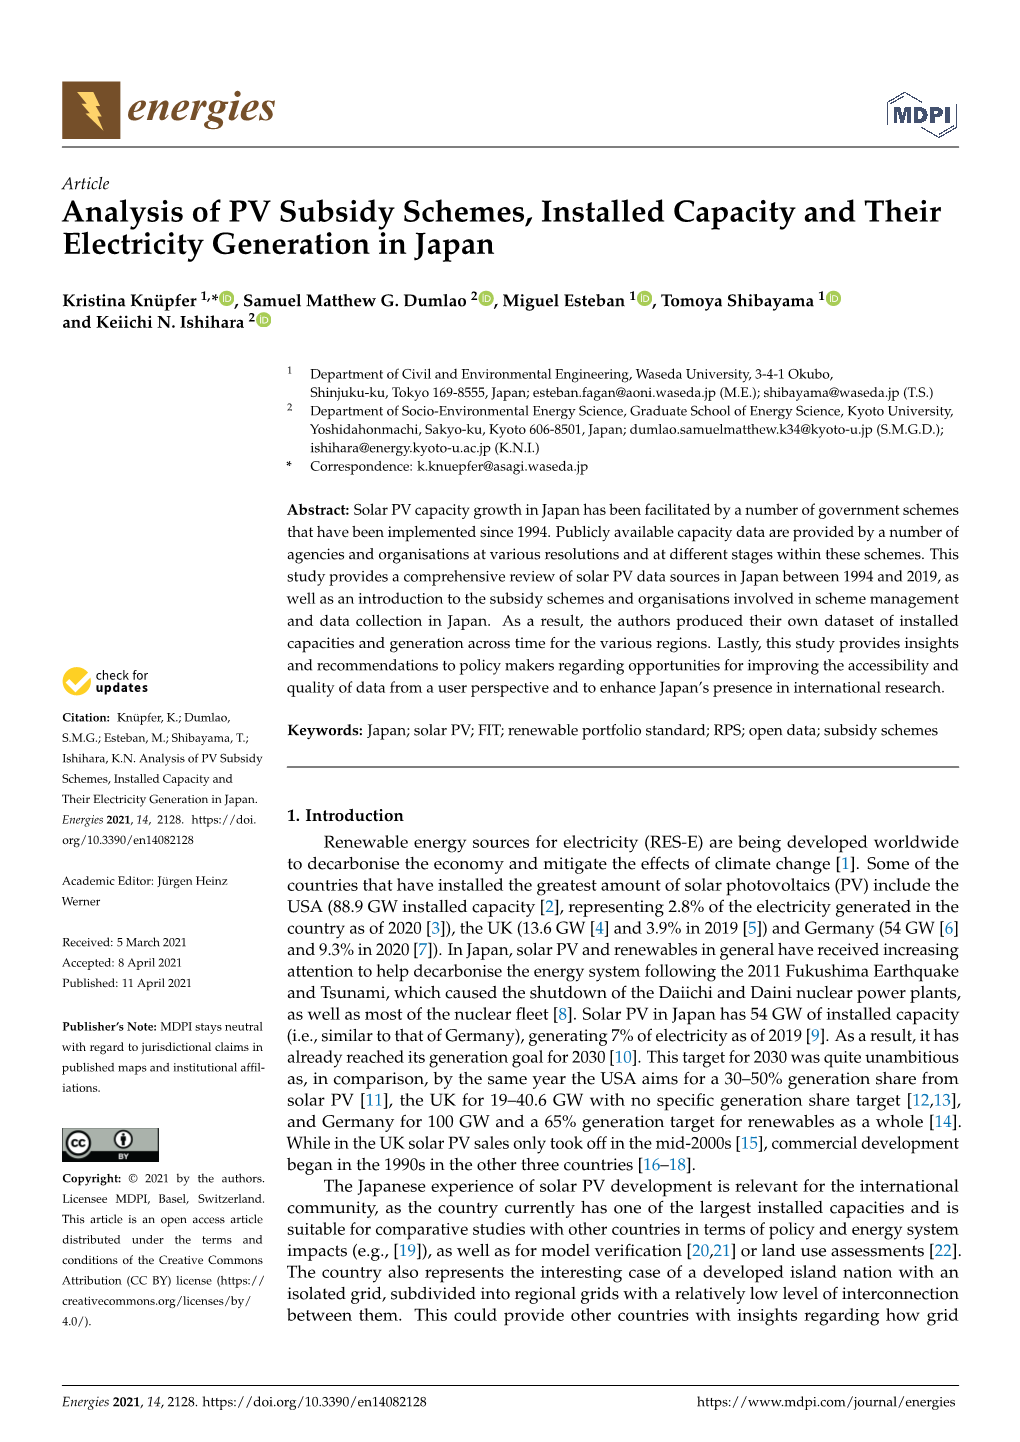 Analysis of PV Subsidy Schemes, Installed Capacity and Their Electricity Generation in Japan